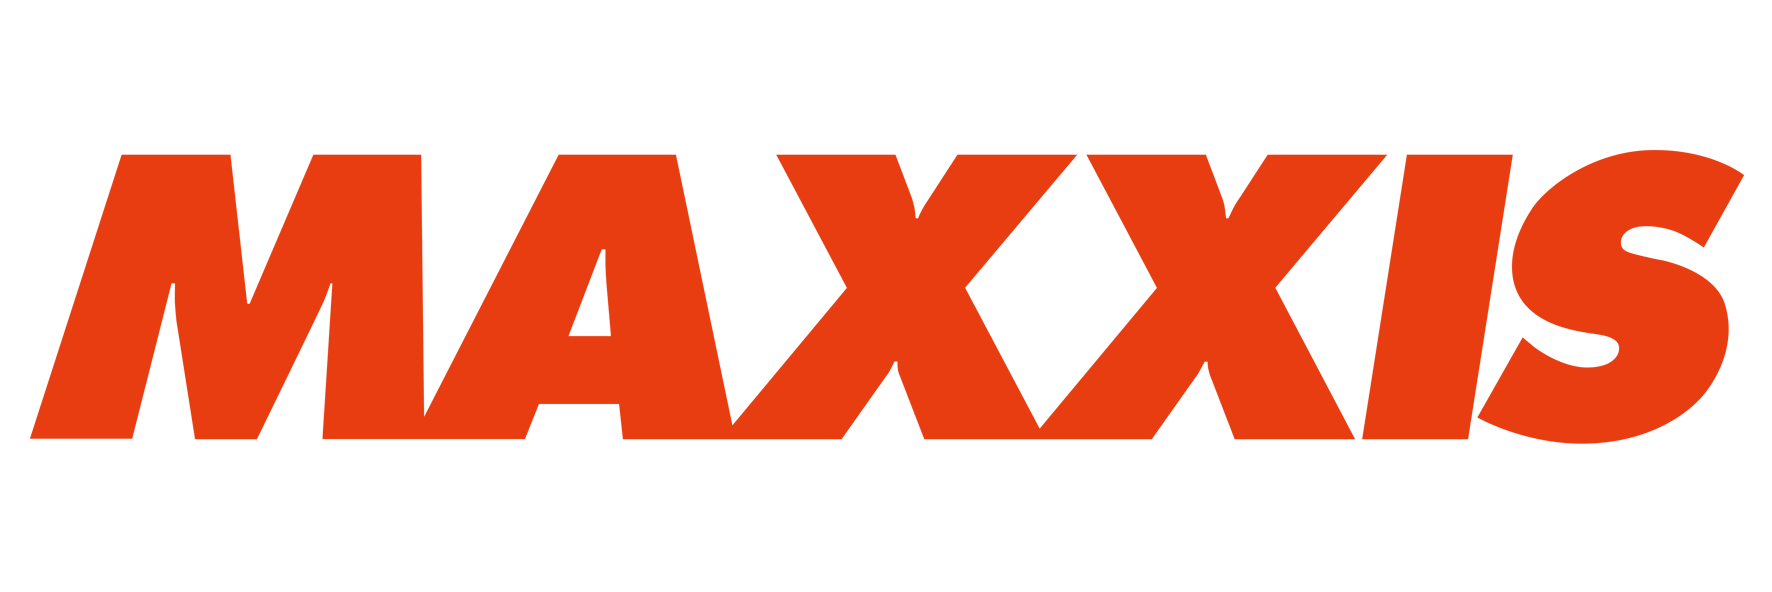 maxxis-logo.png